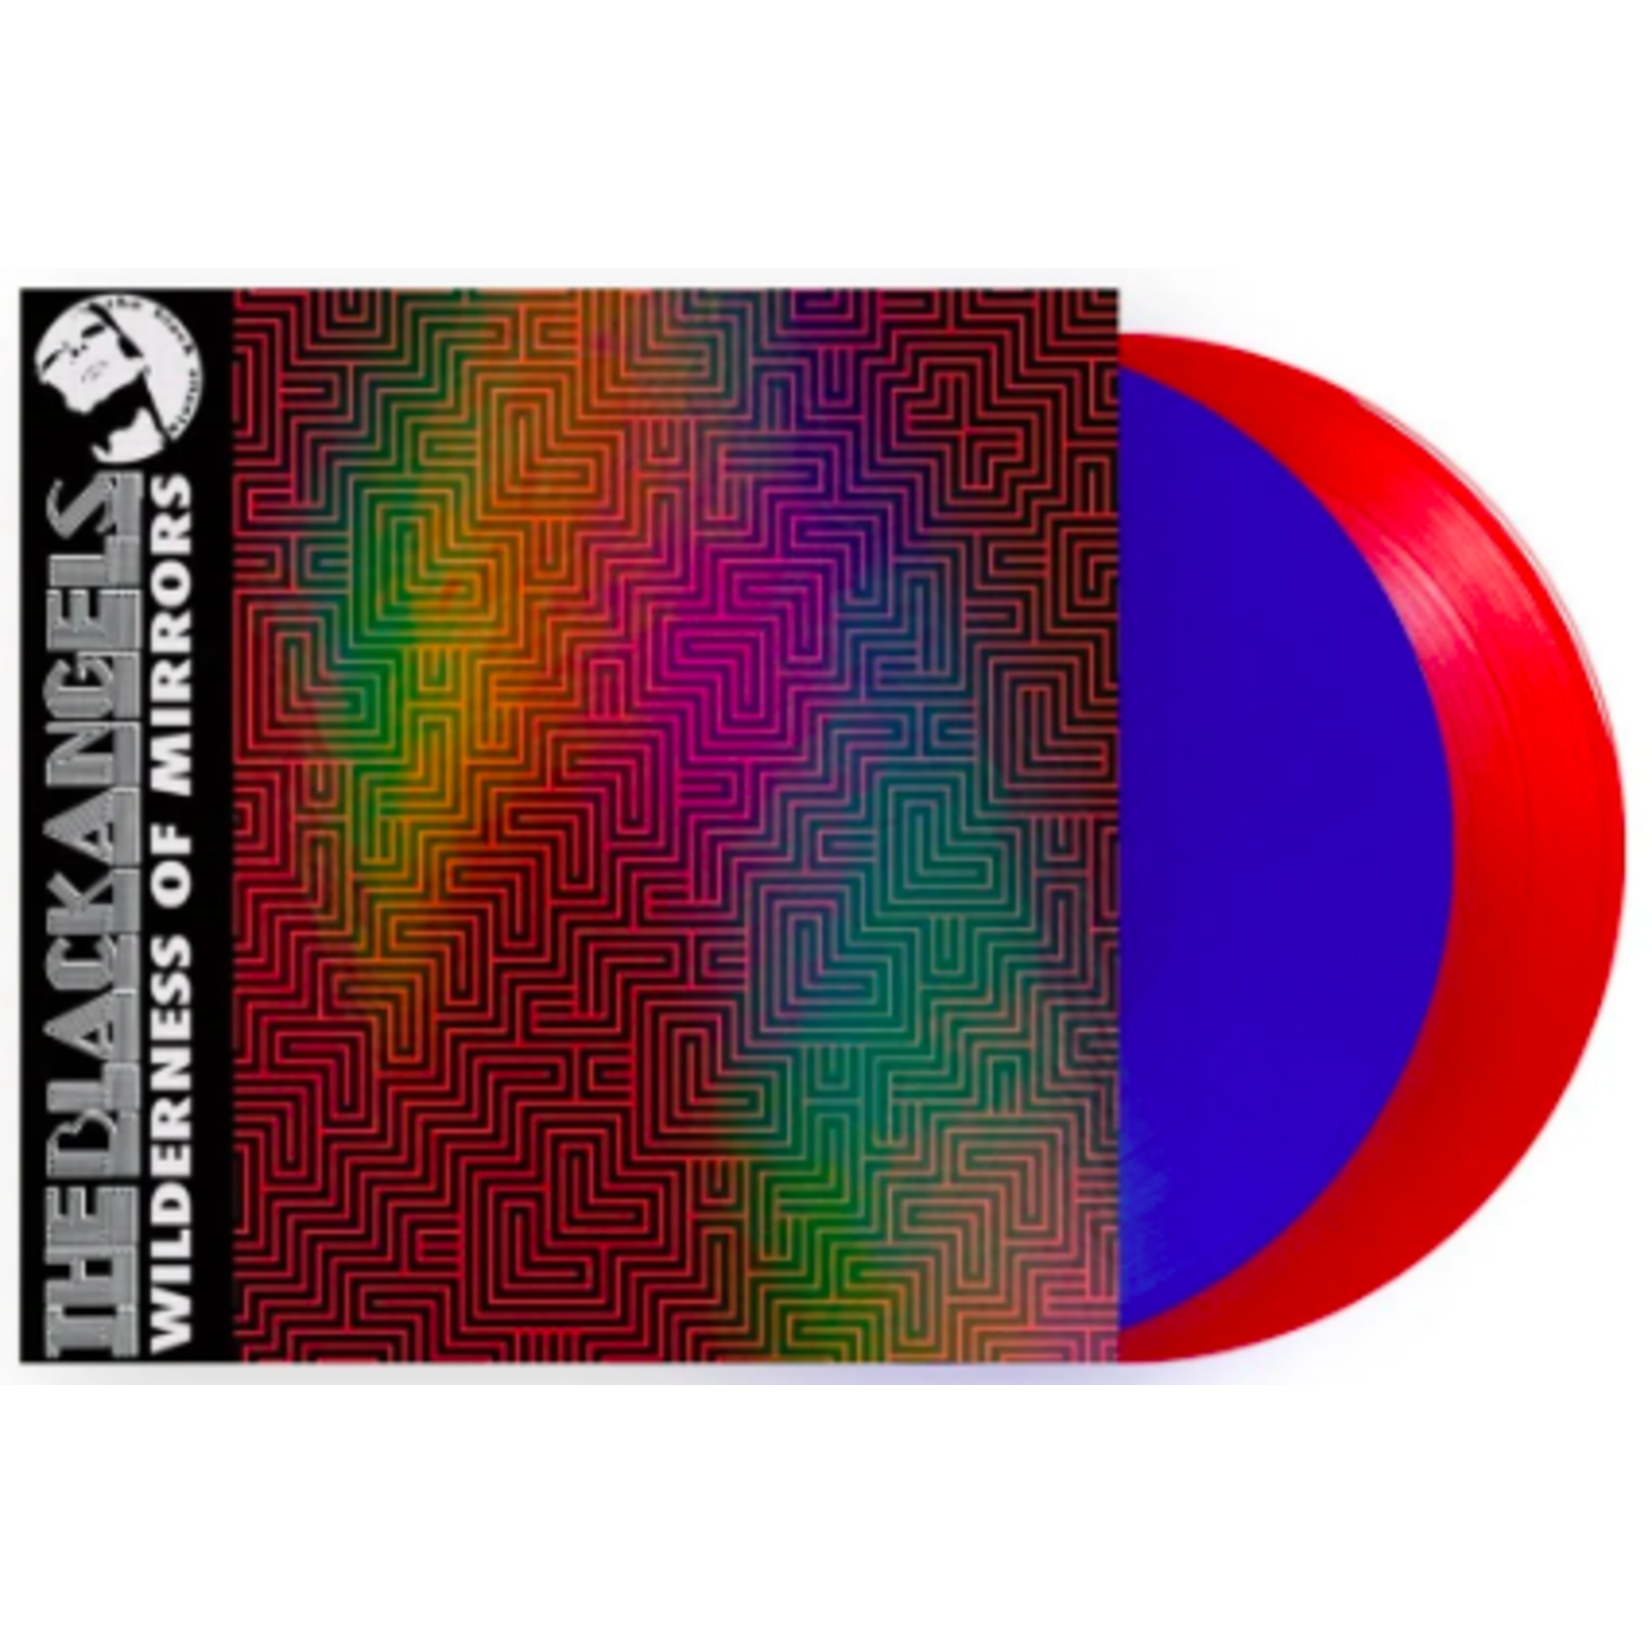 [New] The Black Angels - Wilderness Of Mirrors (Indie exclusive, opaque blue/red vinyl)